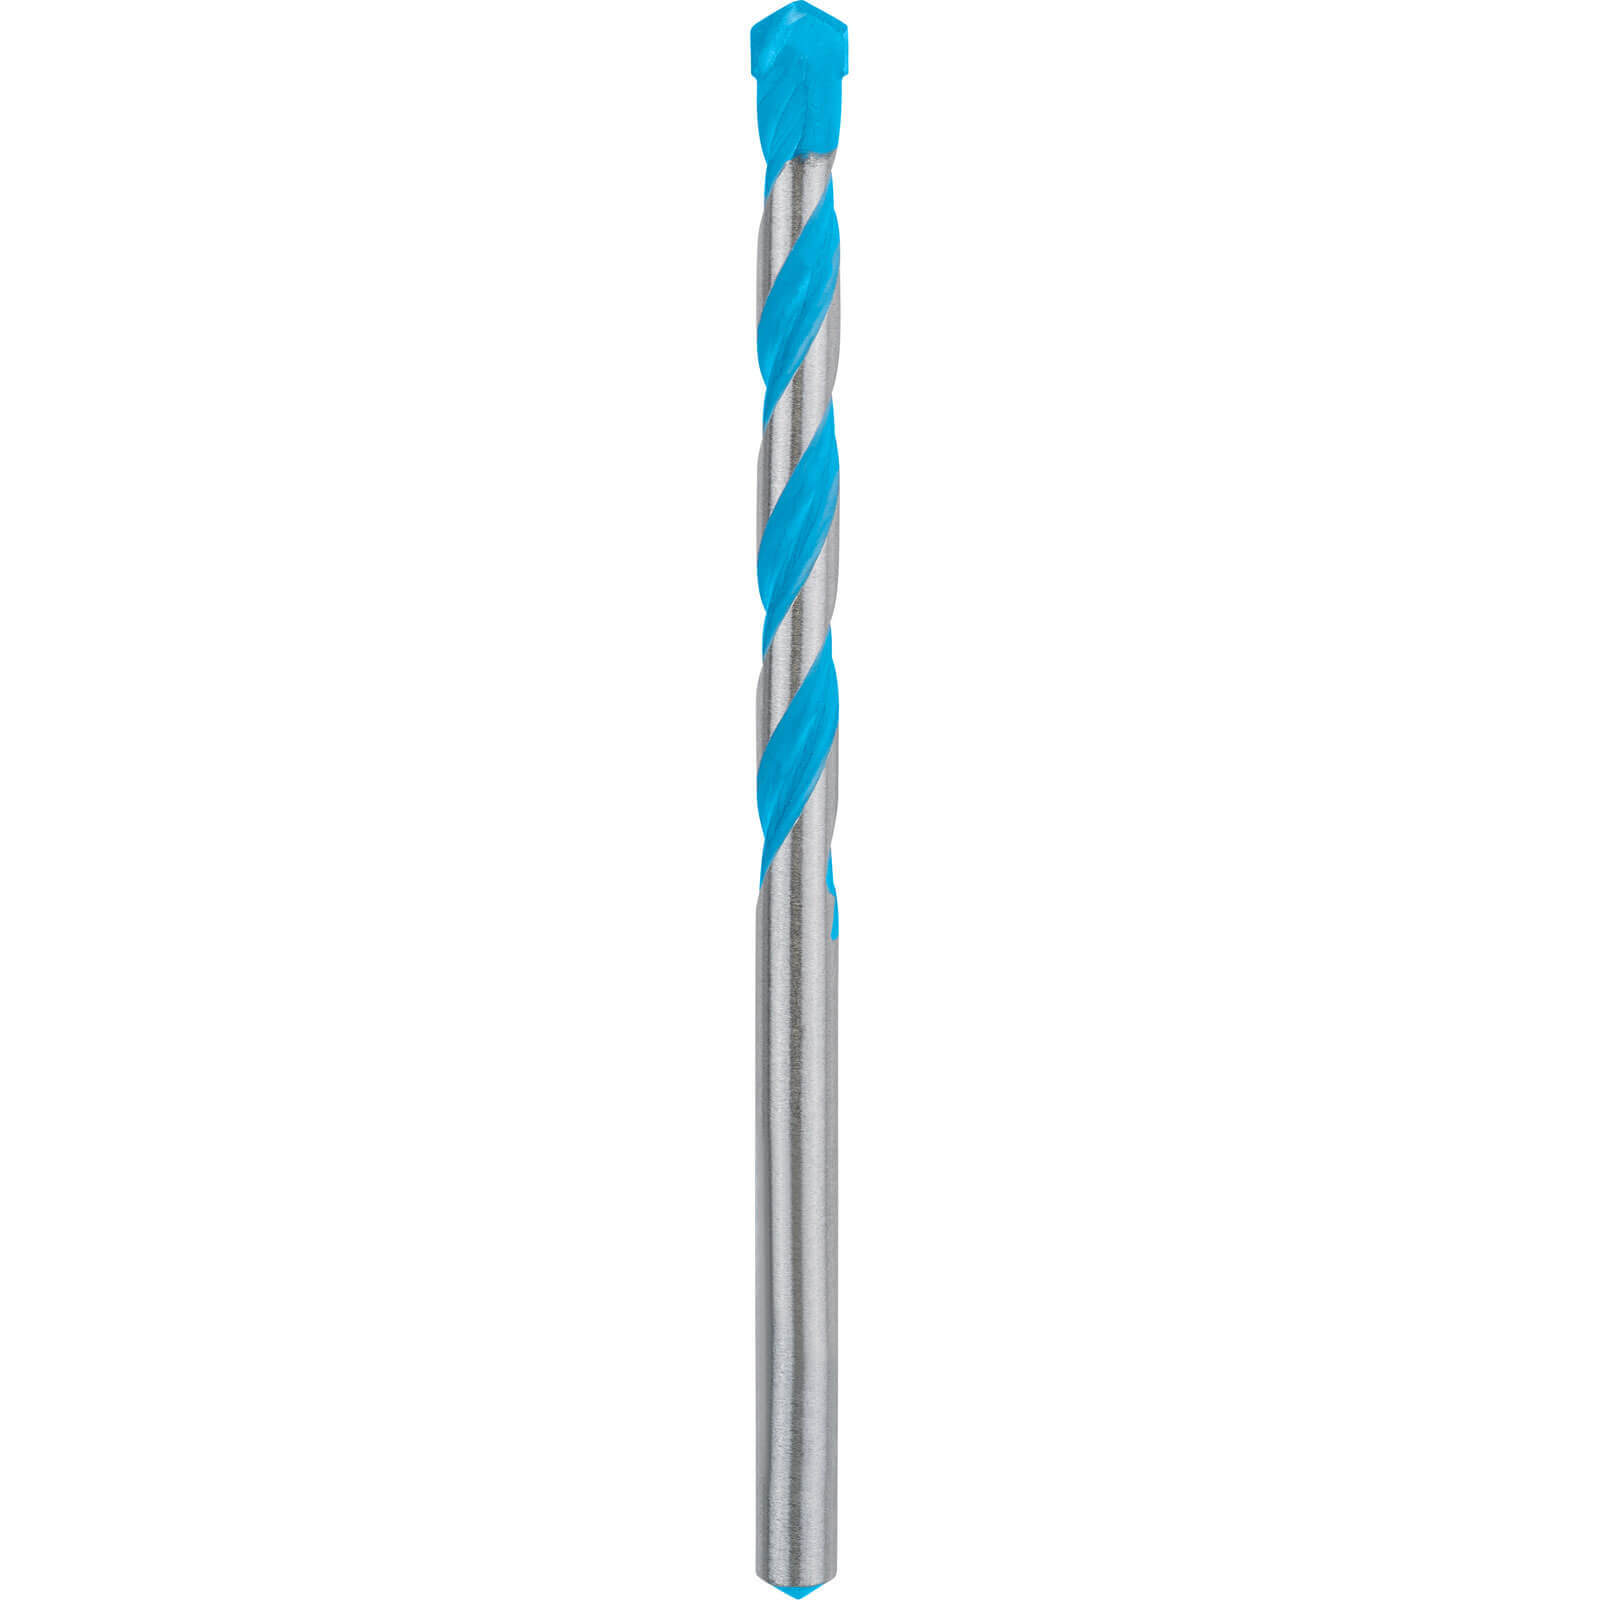 Photo of Bosch Expert Cyl-9 Multi Construction Drill Bit 5mm 85mm Pack Of 1